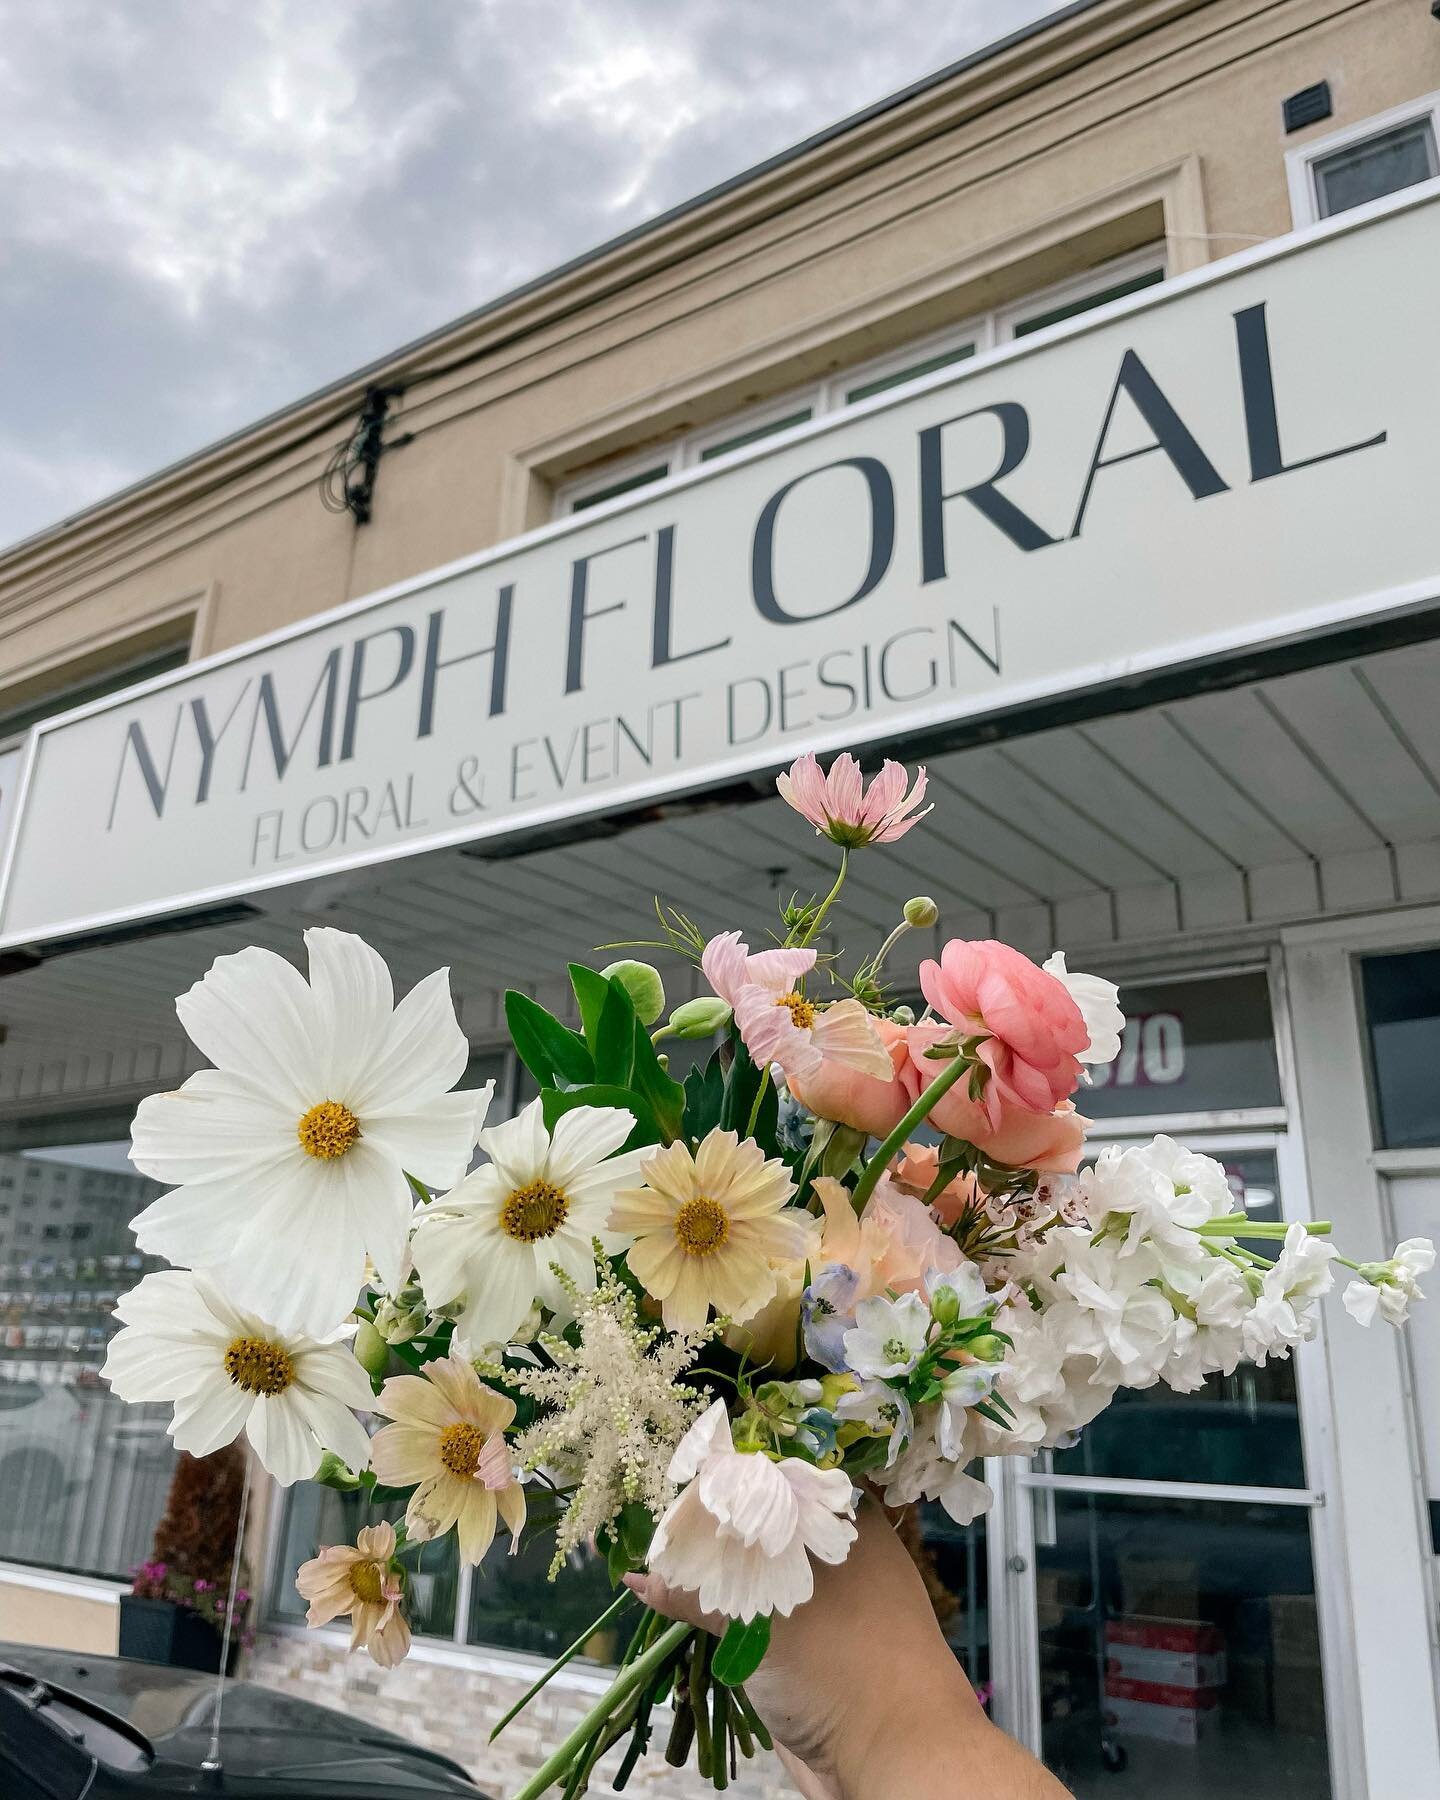 Happy Leap Year Birthday Nymph Floral 🥳🍰💕🥂

We officially opened our doors in Dundalk, ON on February 29th, 2020! So many changes, obstacles, and growth has happened since then. 

While we&rsquo;re no longer in our previous location in Dundalk, I